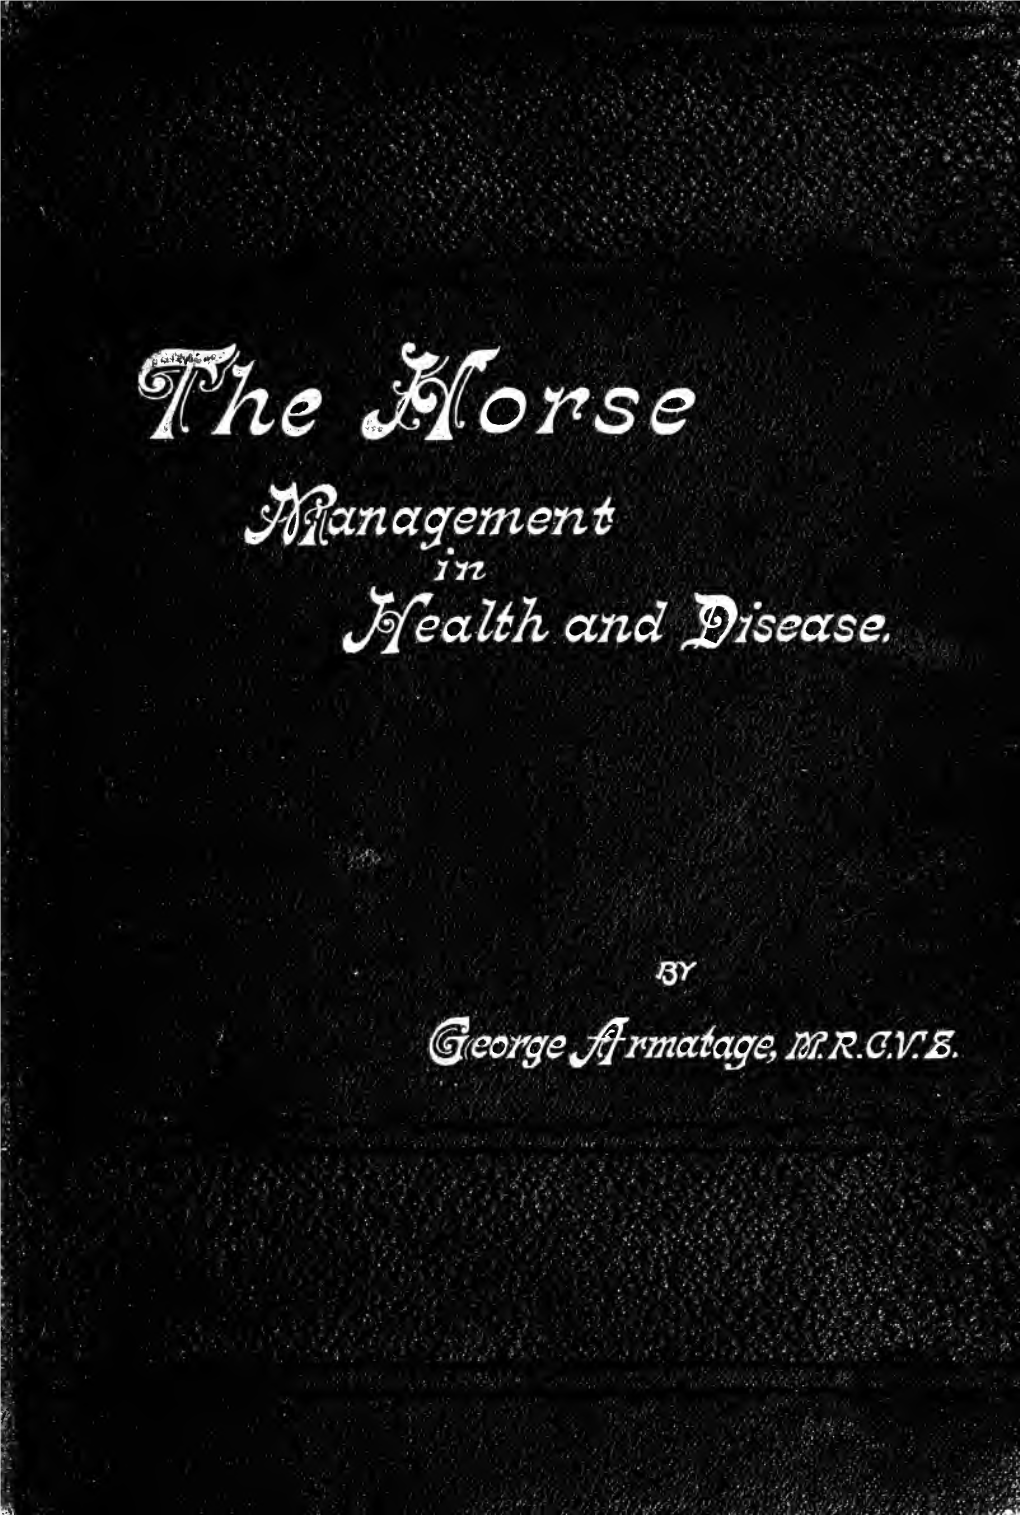 THE HORSEOWNER and STABLEMAN's COMPANION ; Or, Hints on the Selection, Purchase, and Management of the Horse